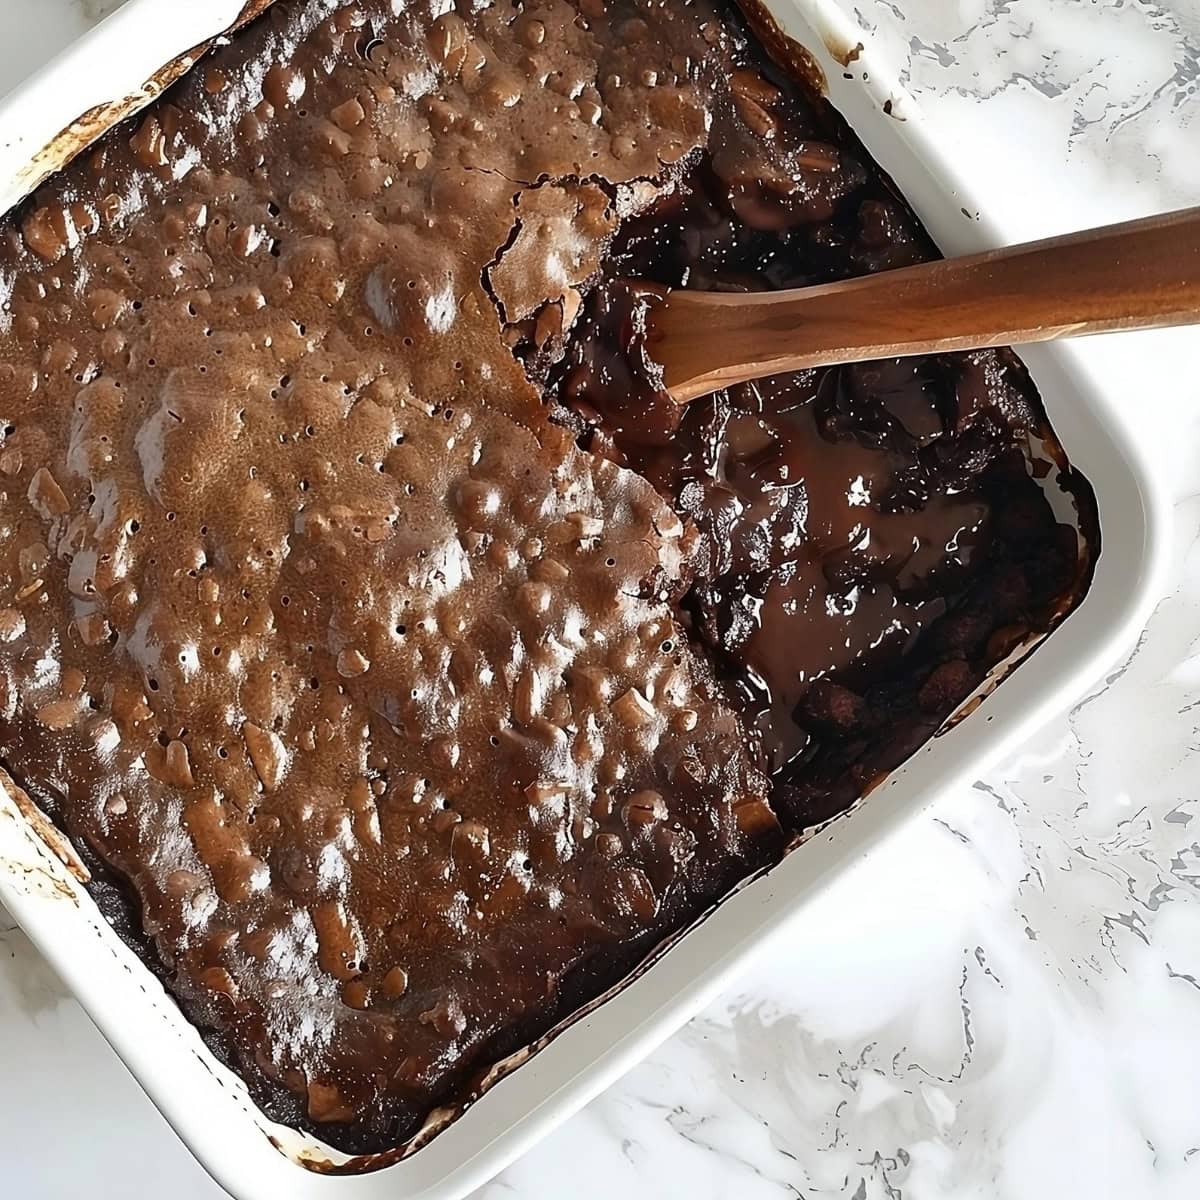 Chocolate cobbler in a square baking dish on a white marble table.